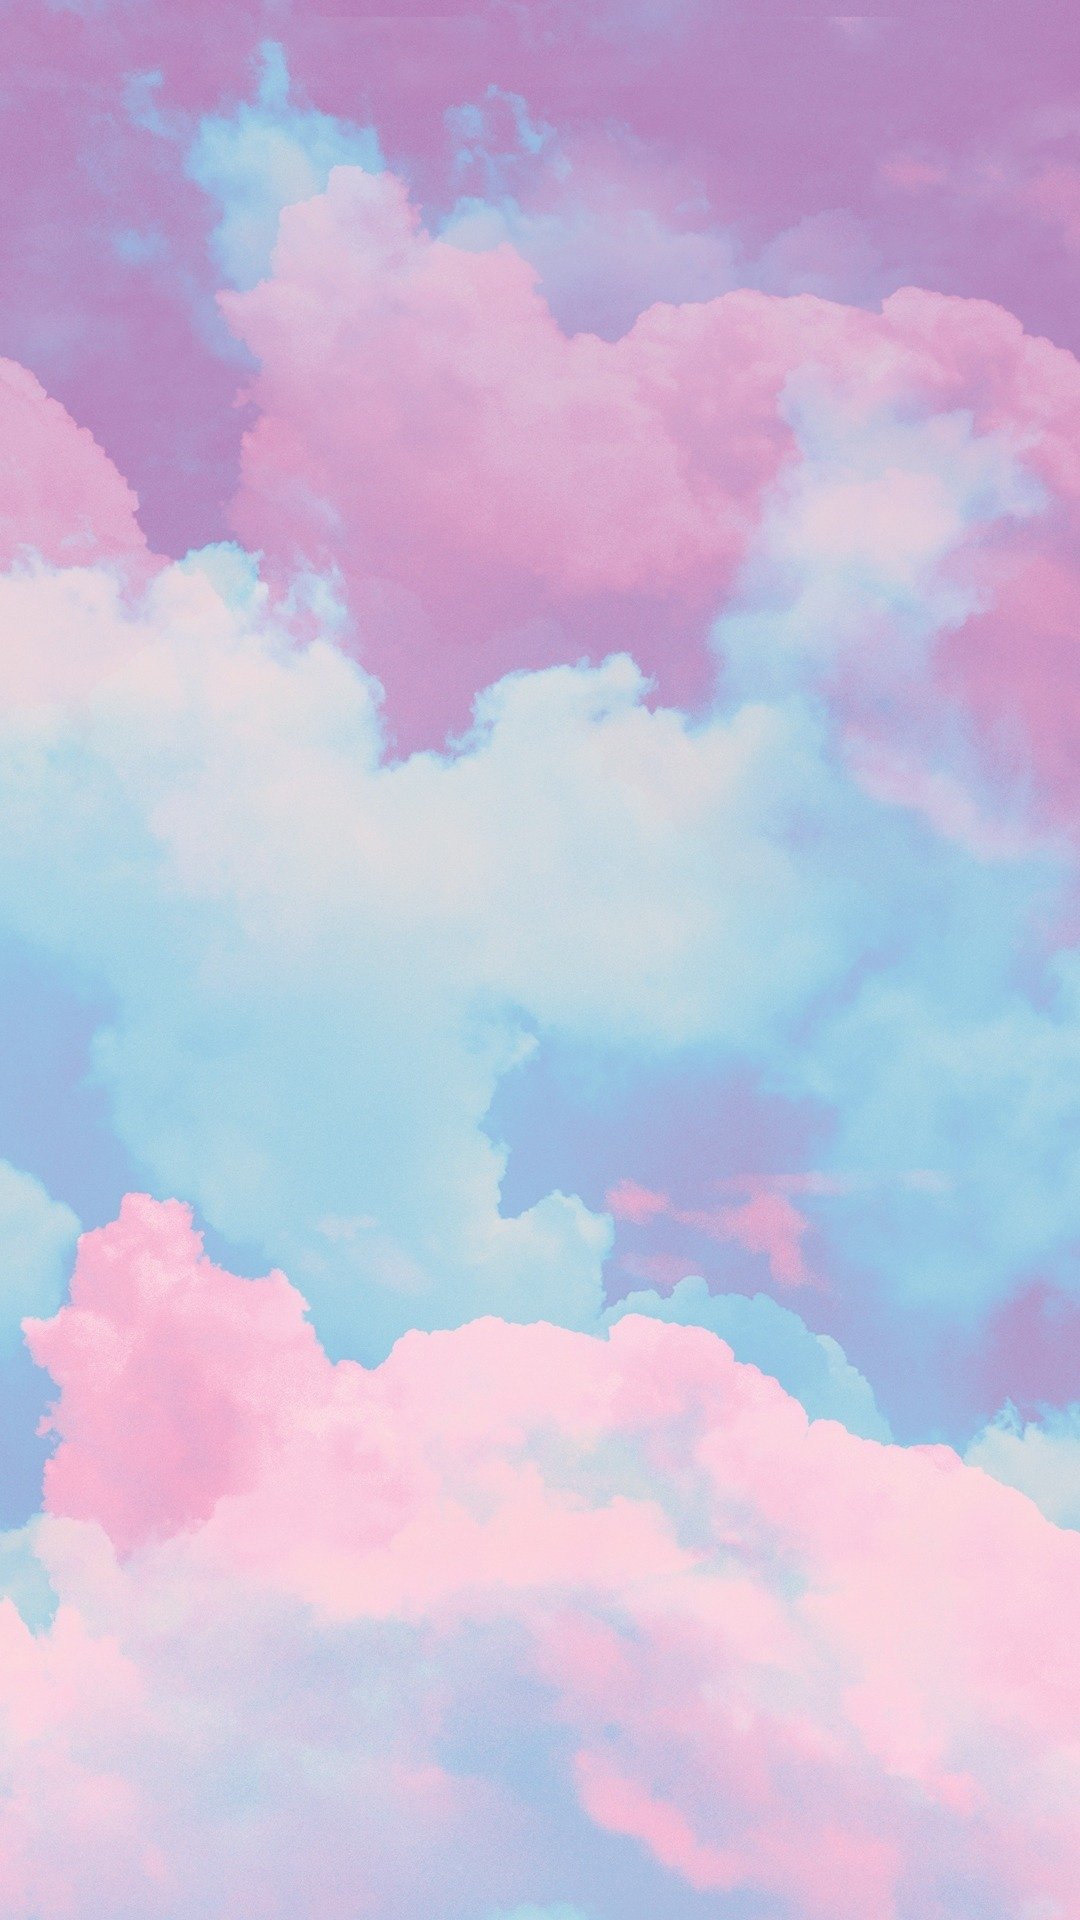 amazing wallpapers for whatsapp,sky,cloud,pink,daytime,meteorological phenomenon